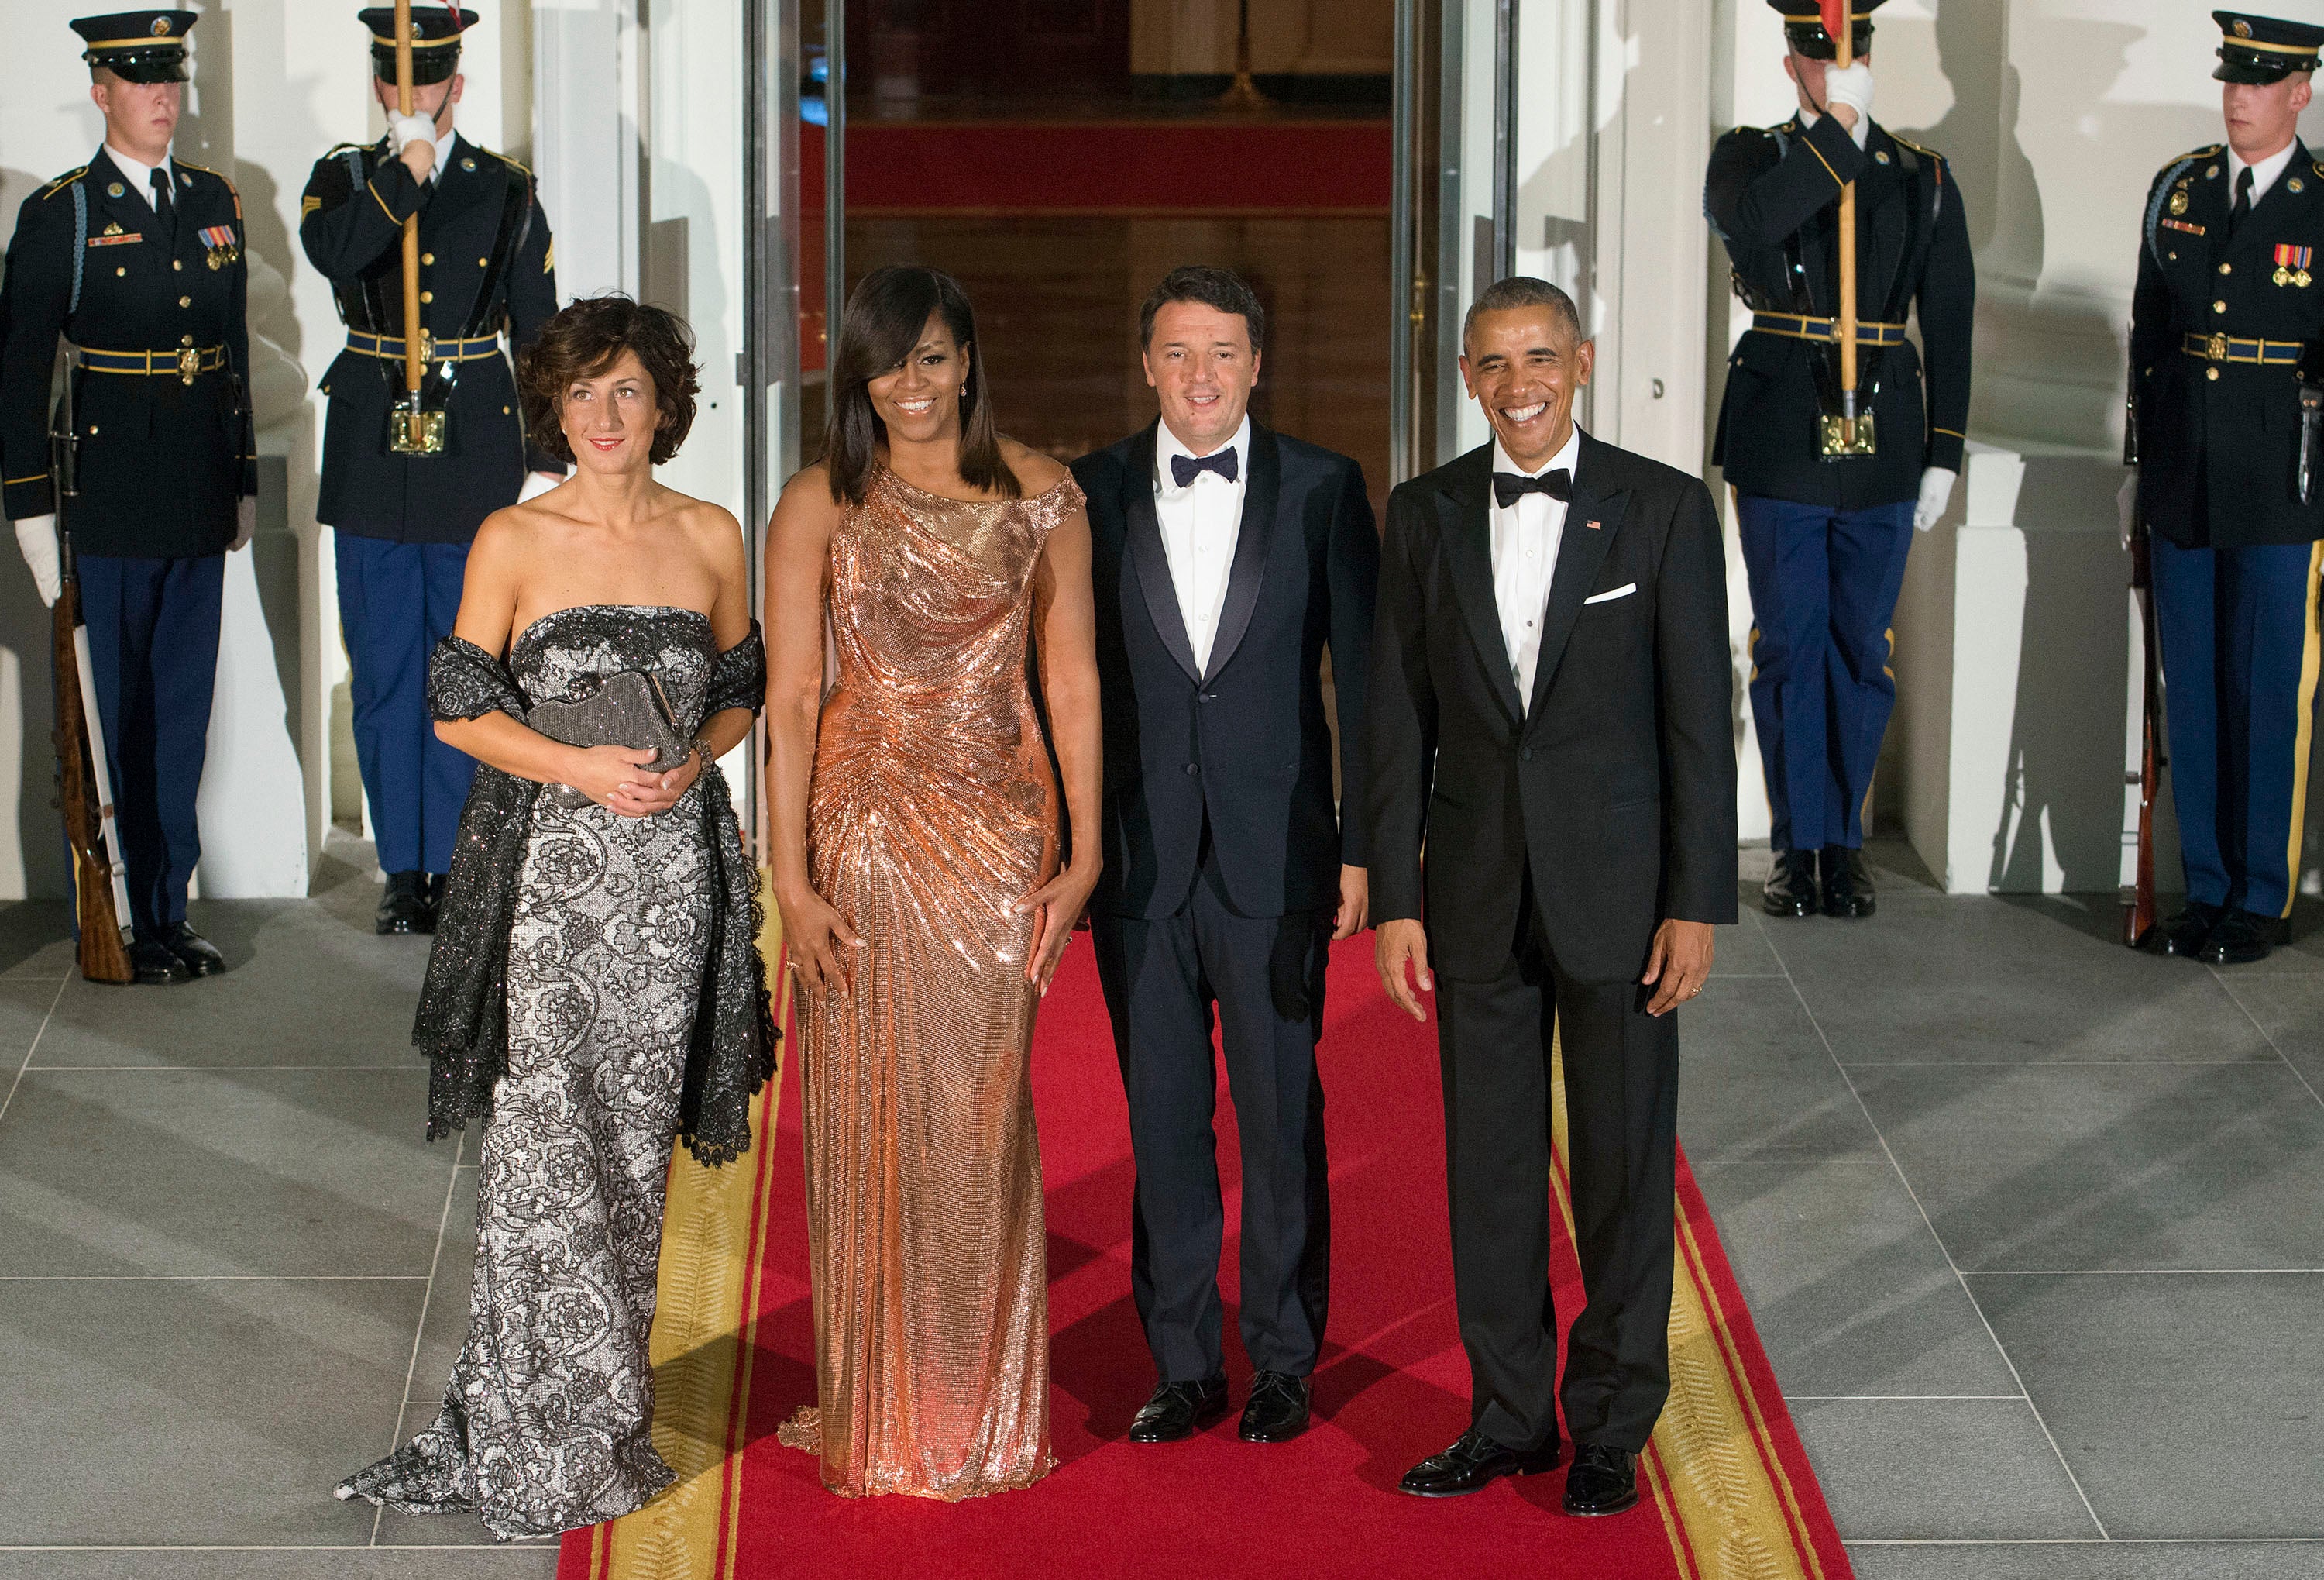 These Moments From The Obama's Last White House State Dinner Will Make You Emotional
